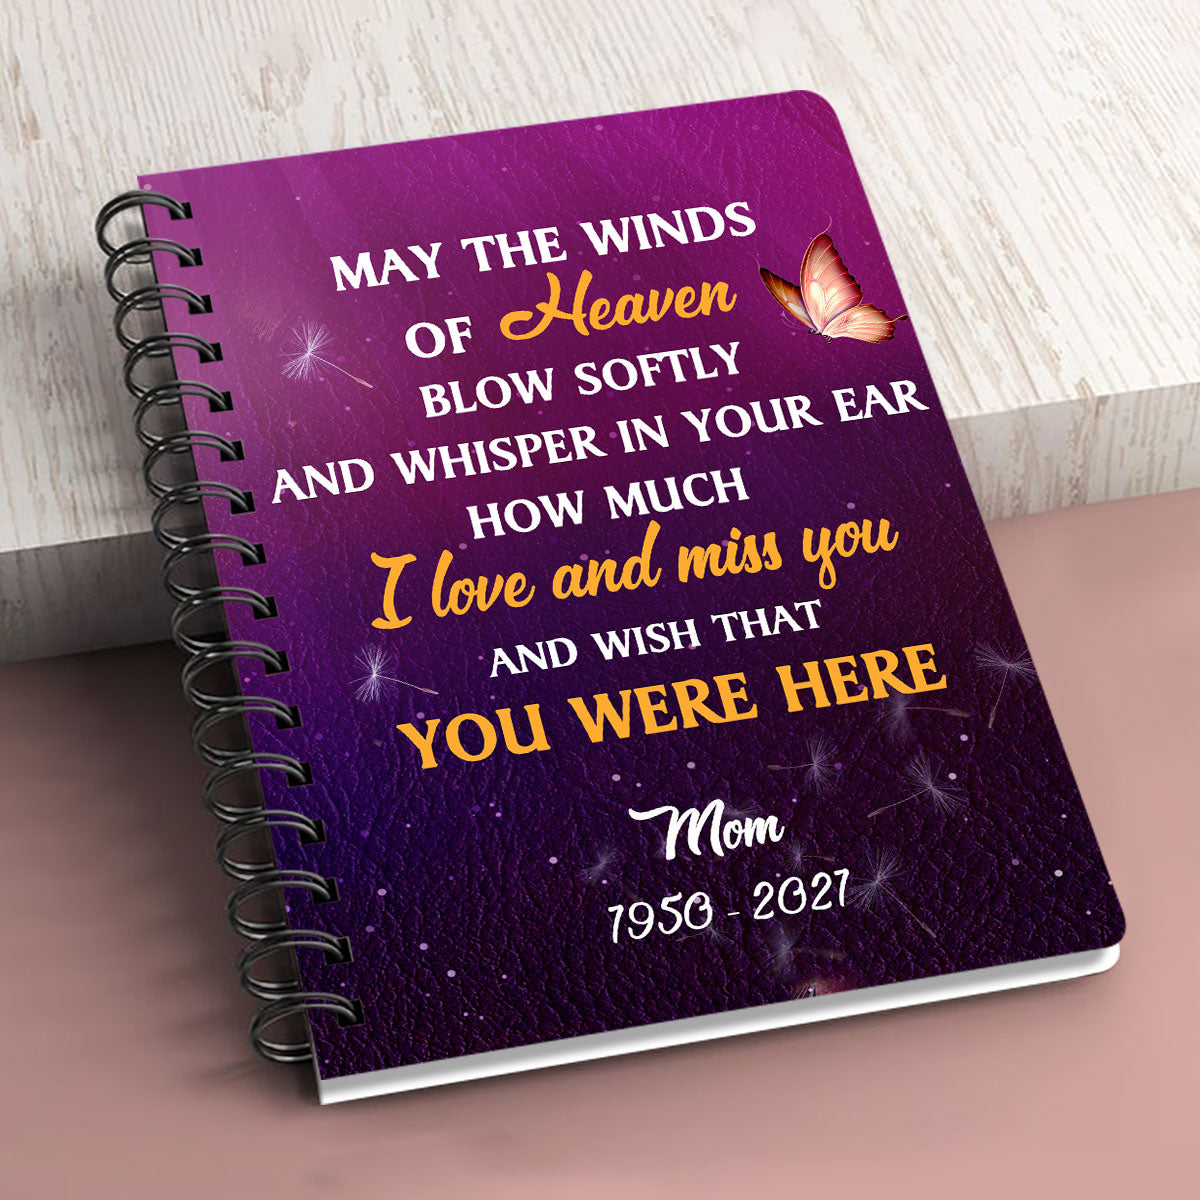 Wish That You Were Here Personalized Memorial Spiral Journal, Inspiration Gifts For Christian People